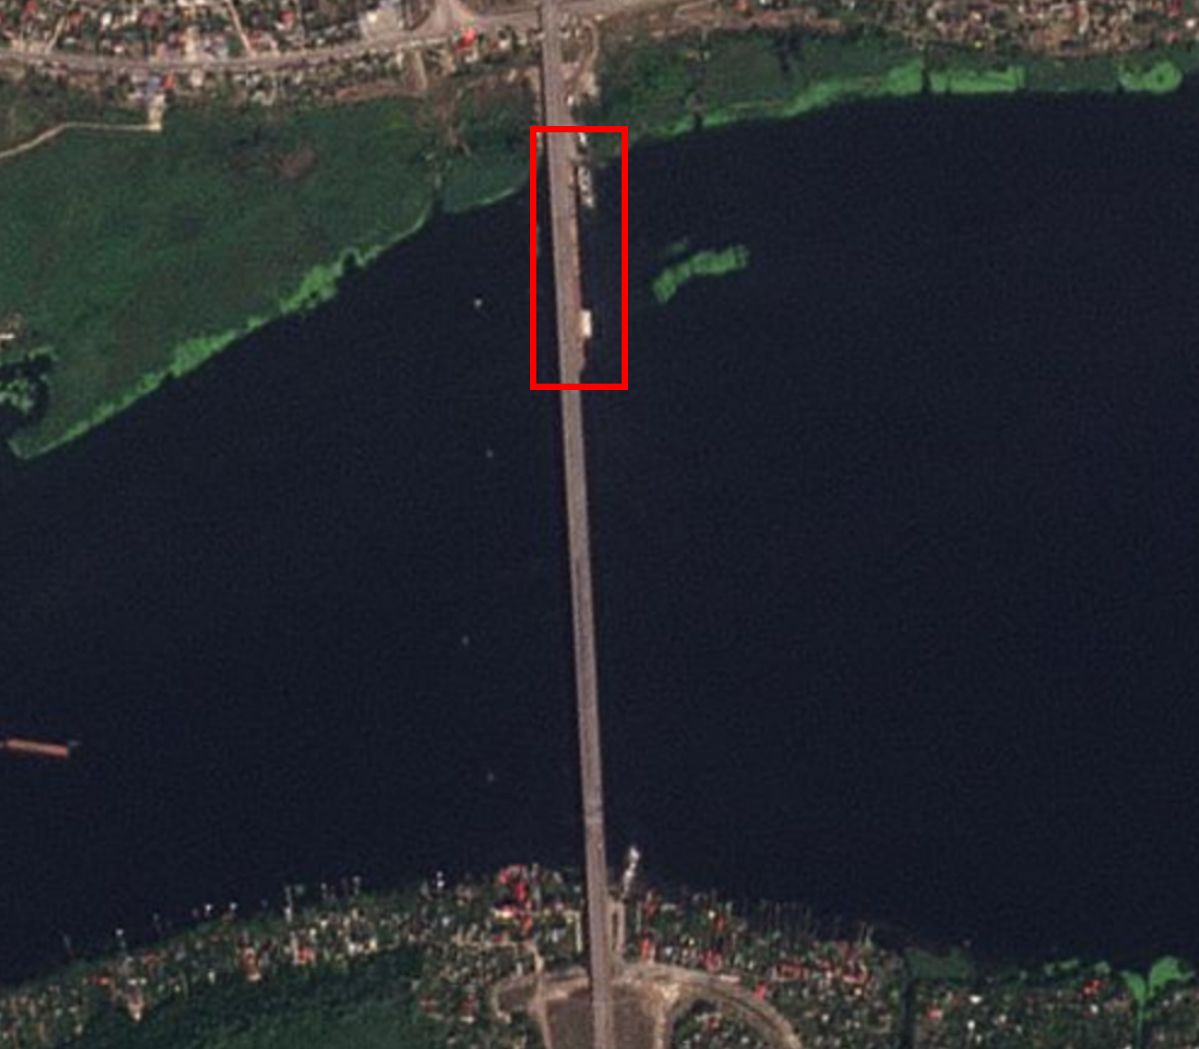 The beginning of a pontoon bridge can be seen alongside the Antonovsky Bridge on the north bank of the Dnipro River. <em>PHOTO © 2022 PLANET LABS INC. ALL RIGHTS RESERVED. REPRINTED BY PERMISSION</em>